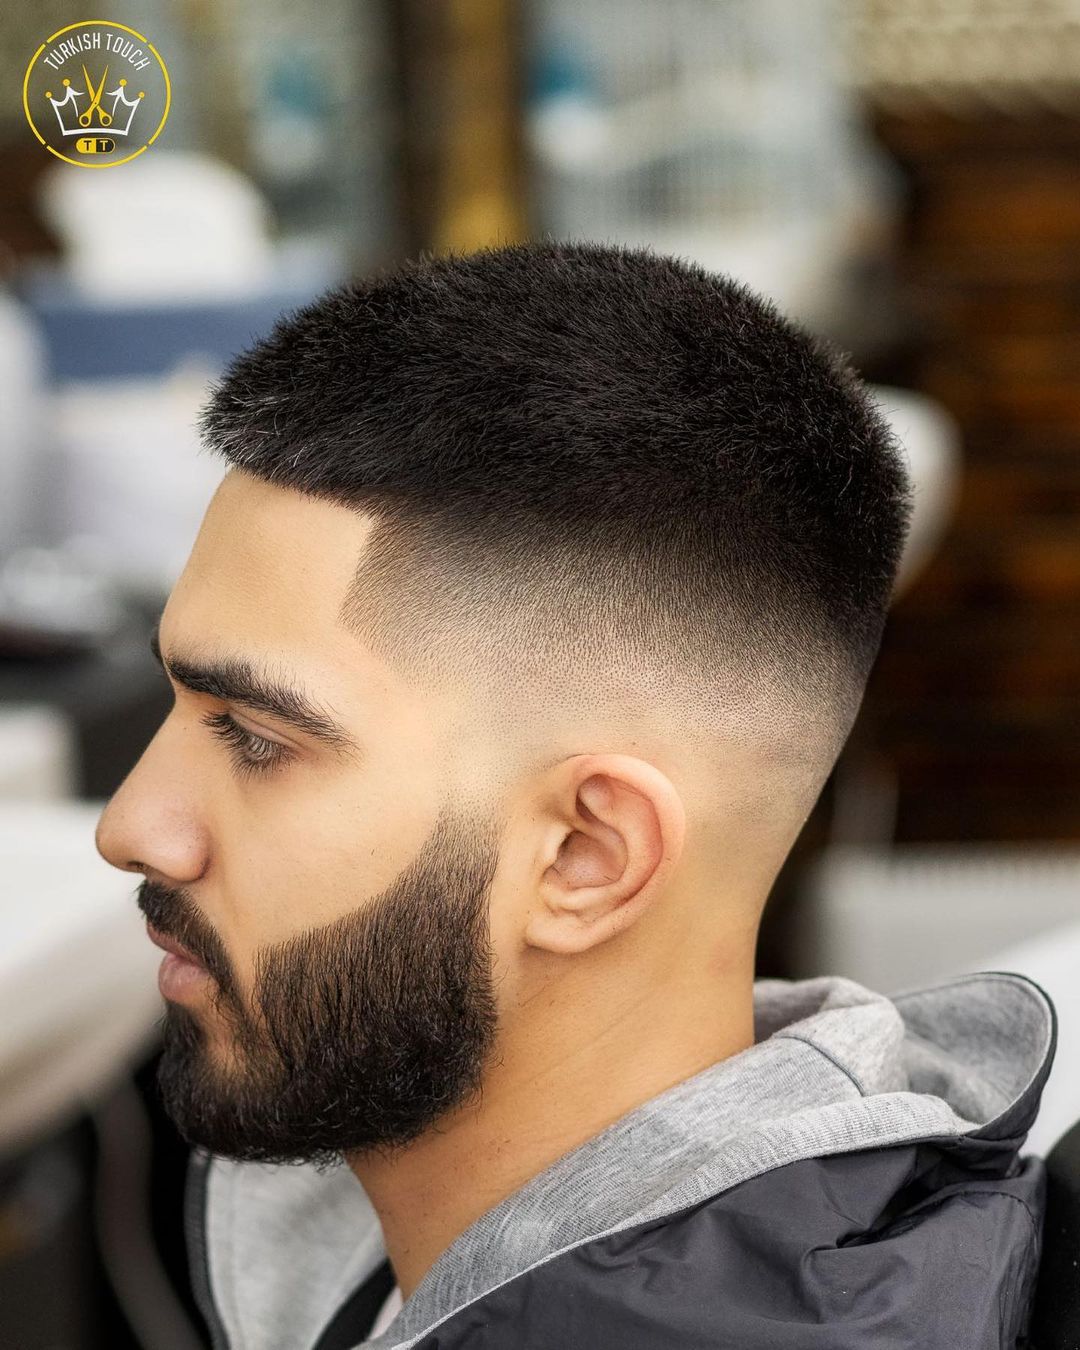 Boy Hair Style Images || Boy Hair Style Images Download || Hairstyles Boys  Wallpapers - Mixing Images